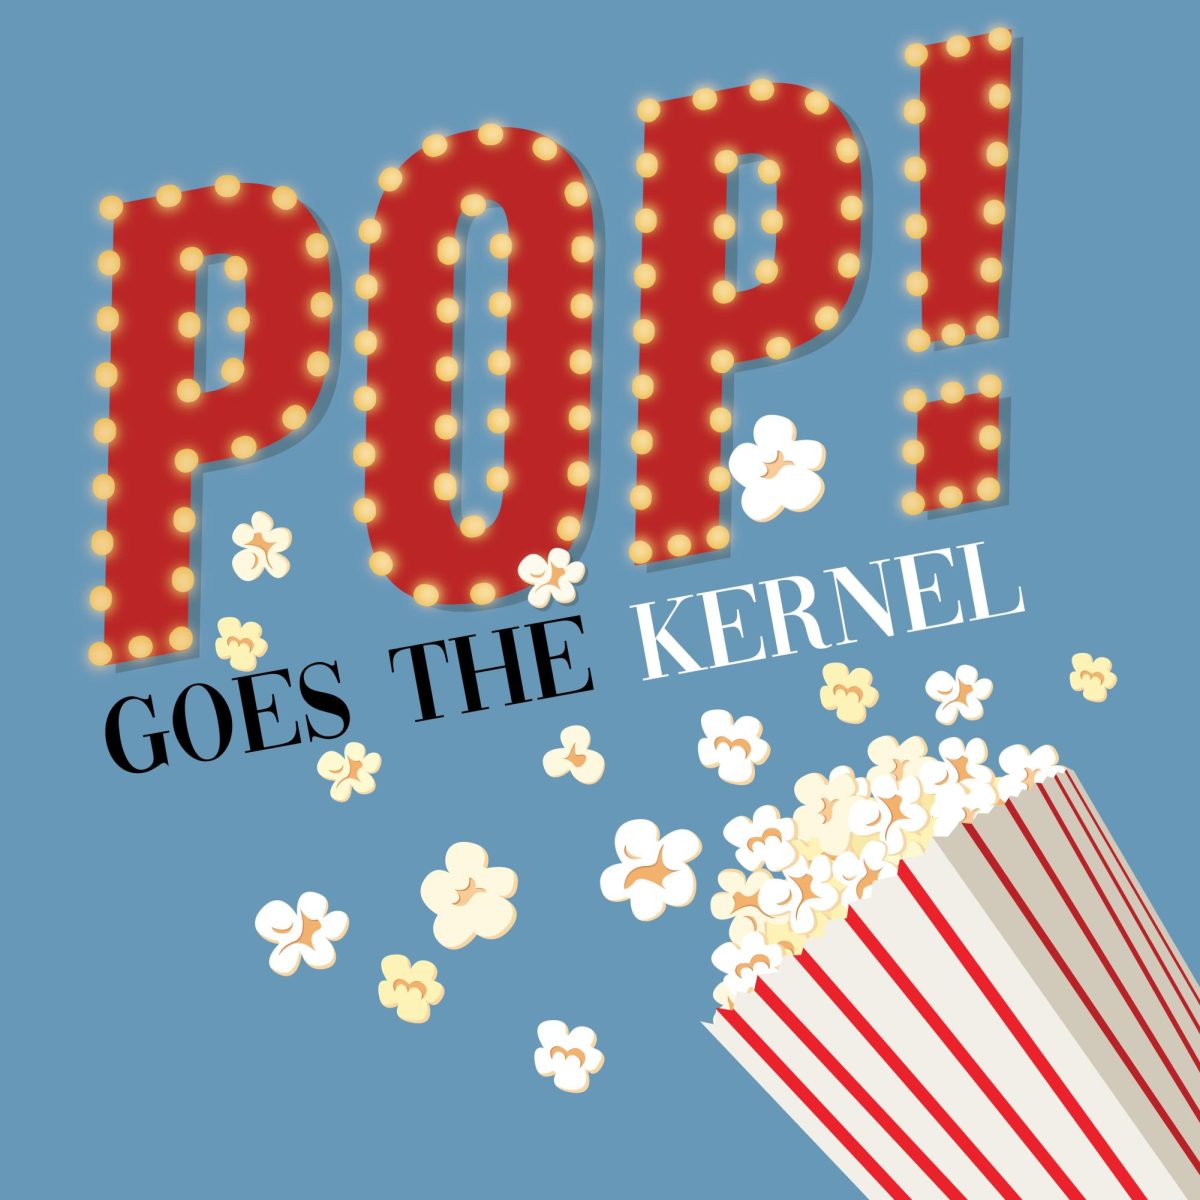 POP! goes the Kernel: Willys Chocolate Experience, Jennifer Lopezs new movie and more